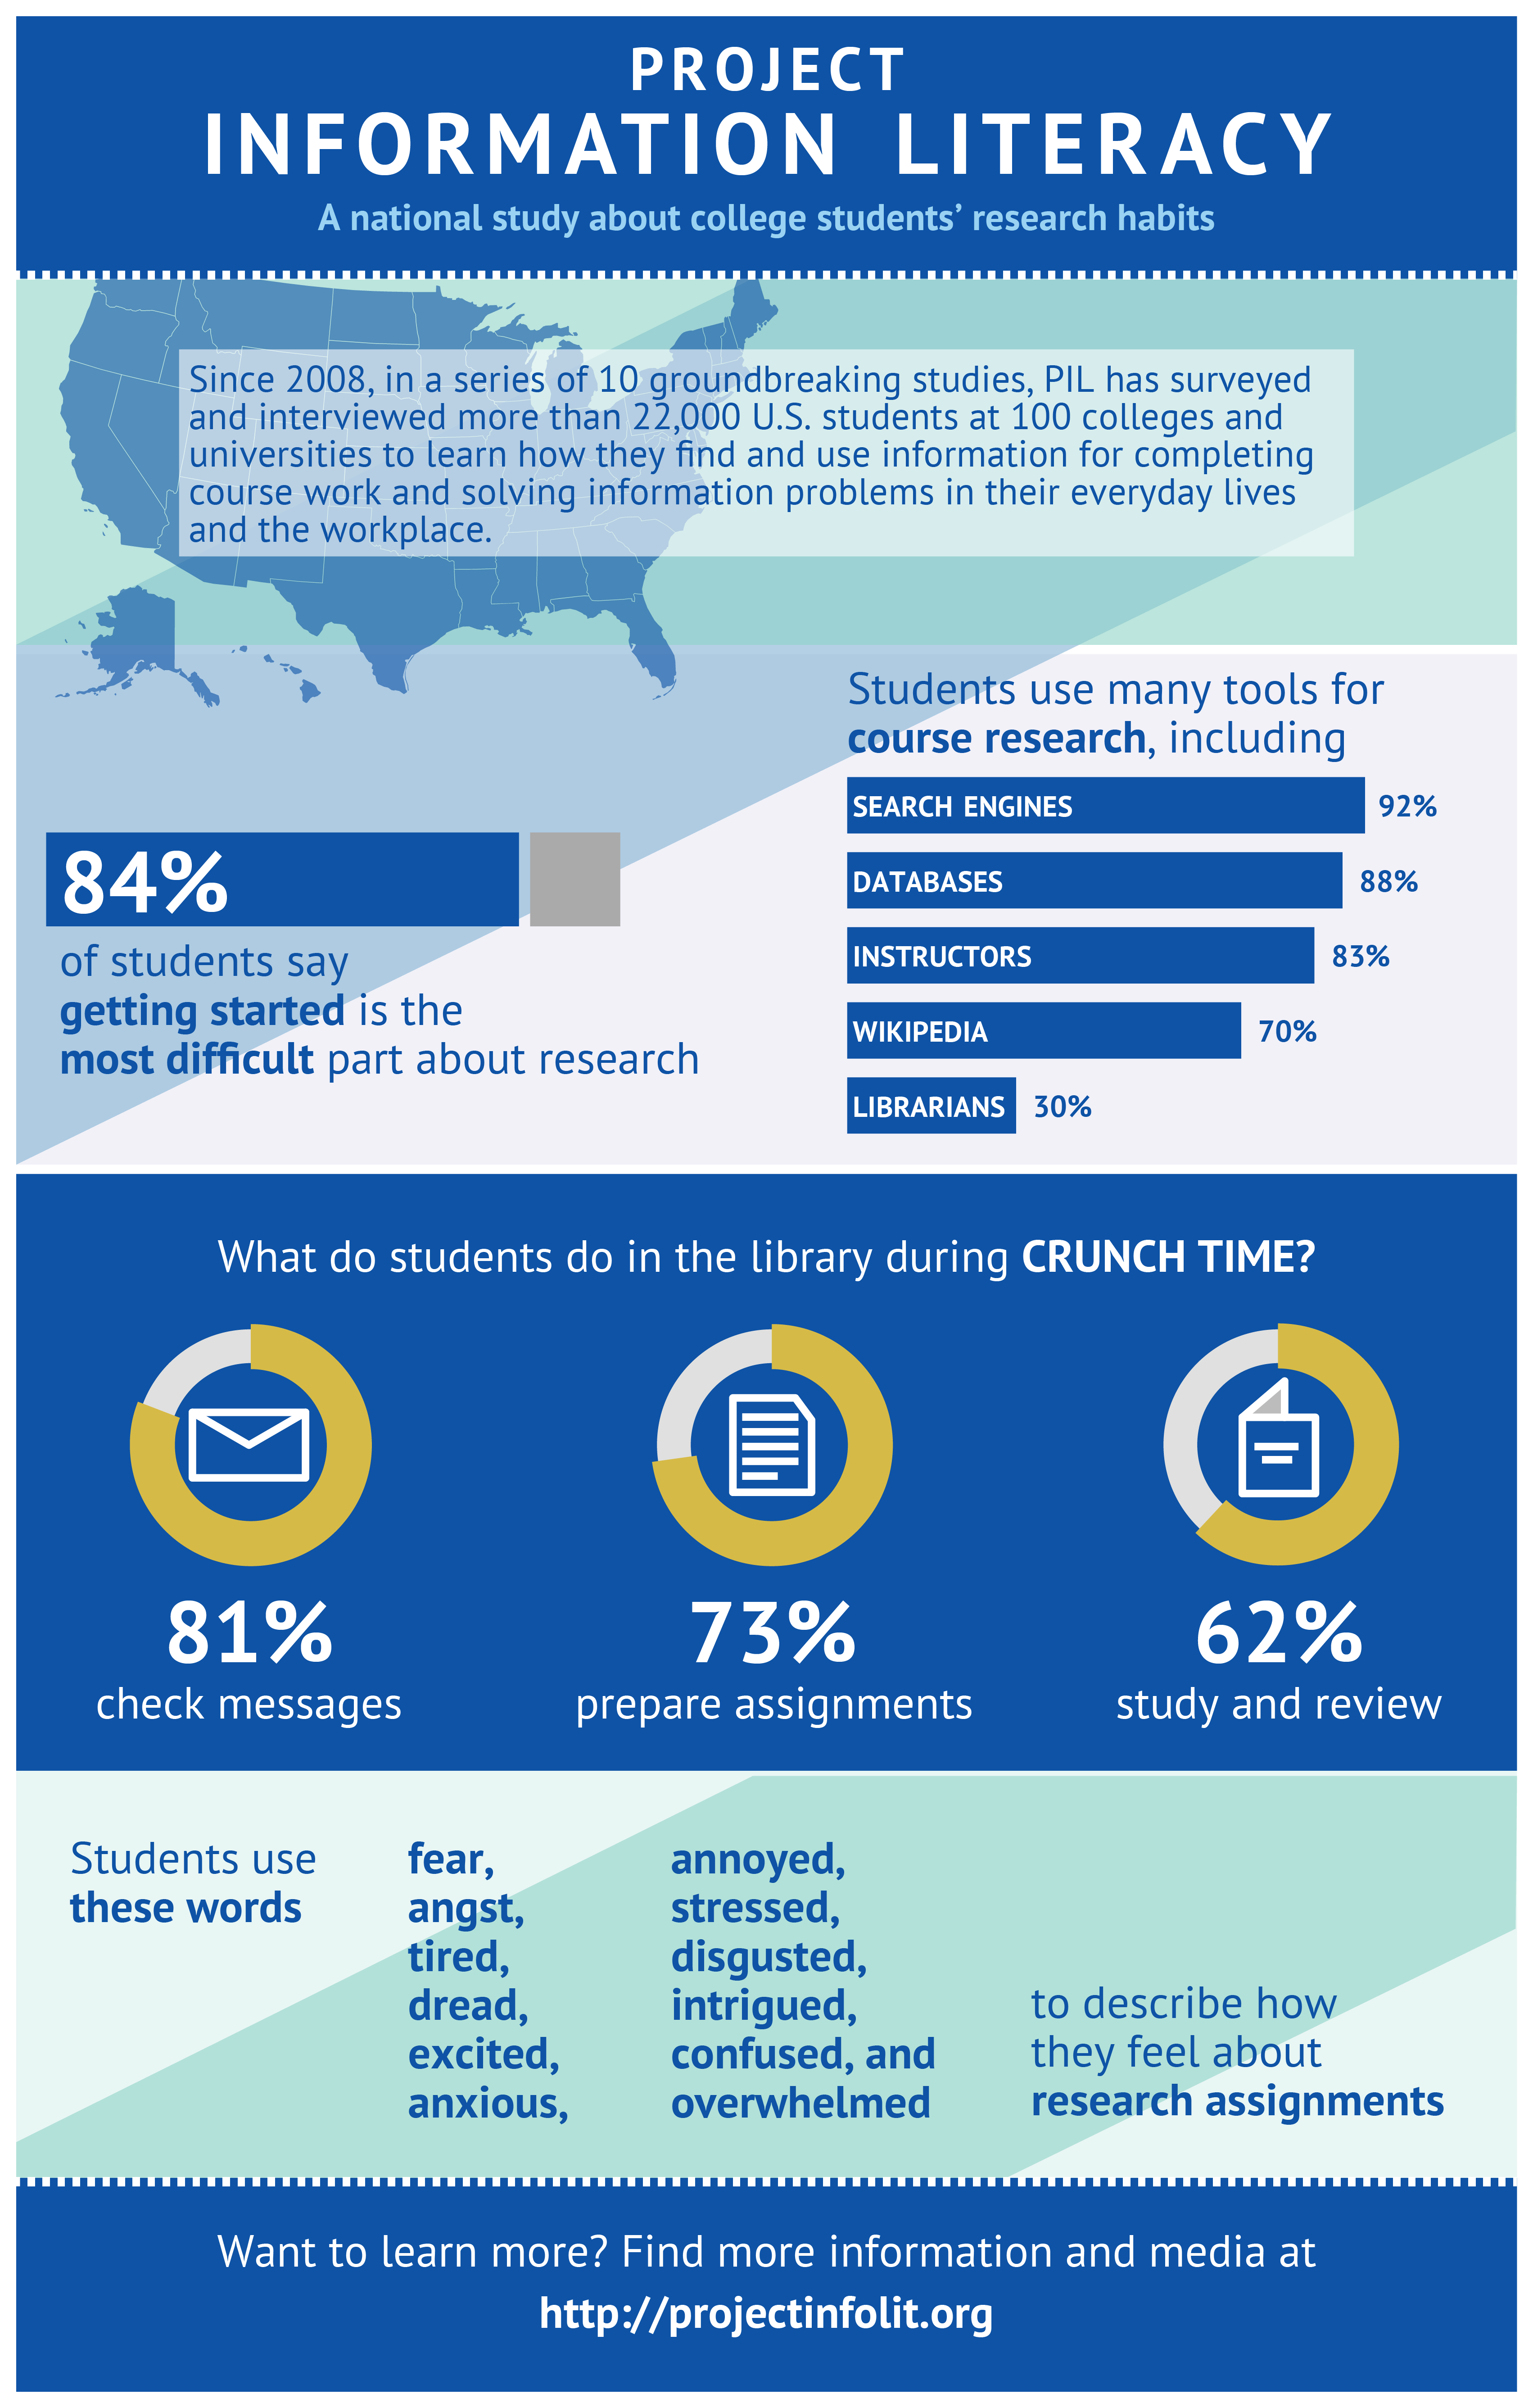 infographic from project information literacy